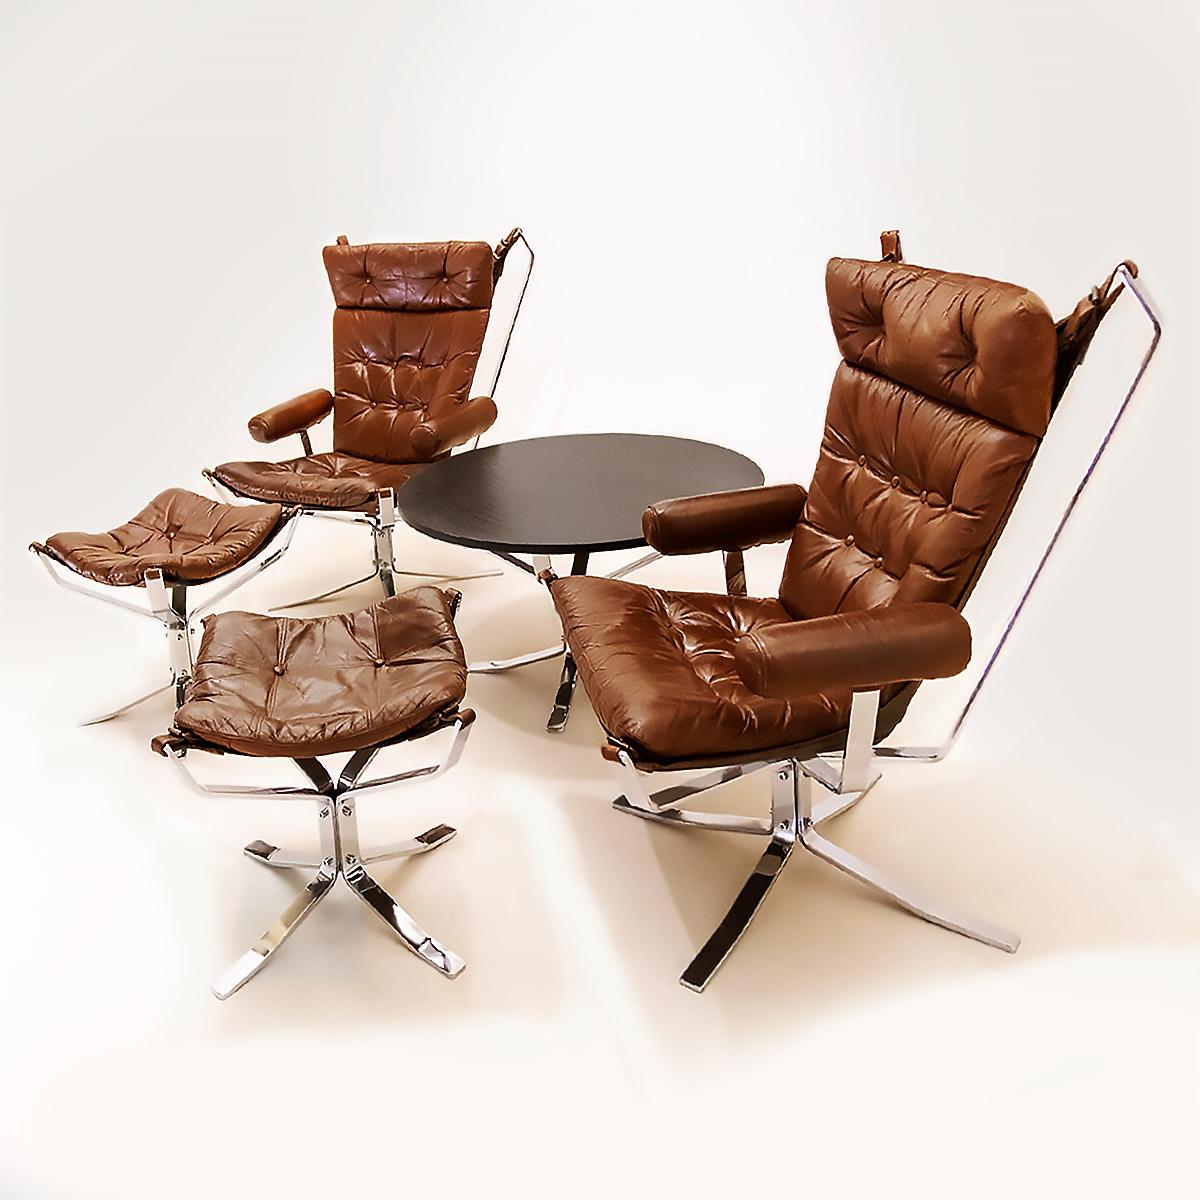 Danish vintage 'Superstar' chrome and leather Sigurd Ressell Falcon style lounge chair set in brown leather and Chrome.

An incredibly rare complete and original ‘Superstar’ lounge set by Mid Century Danish furniture producer Trygg Mobler that was